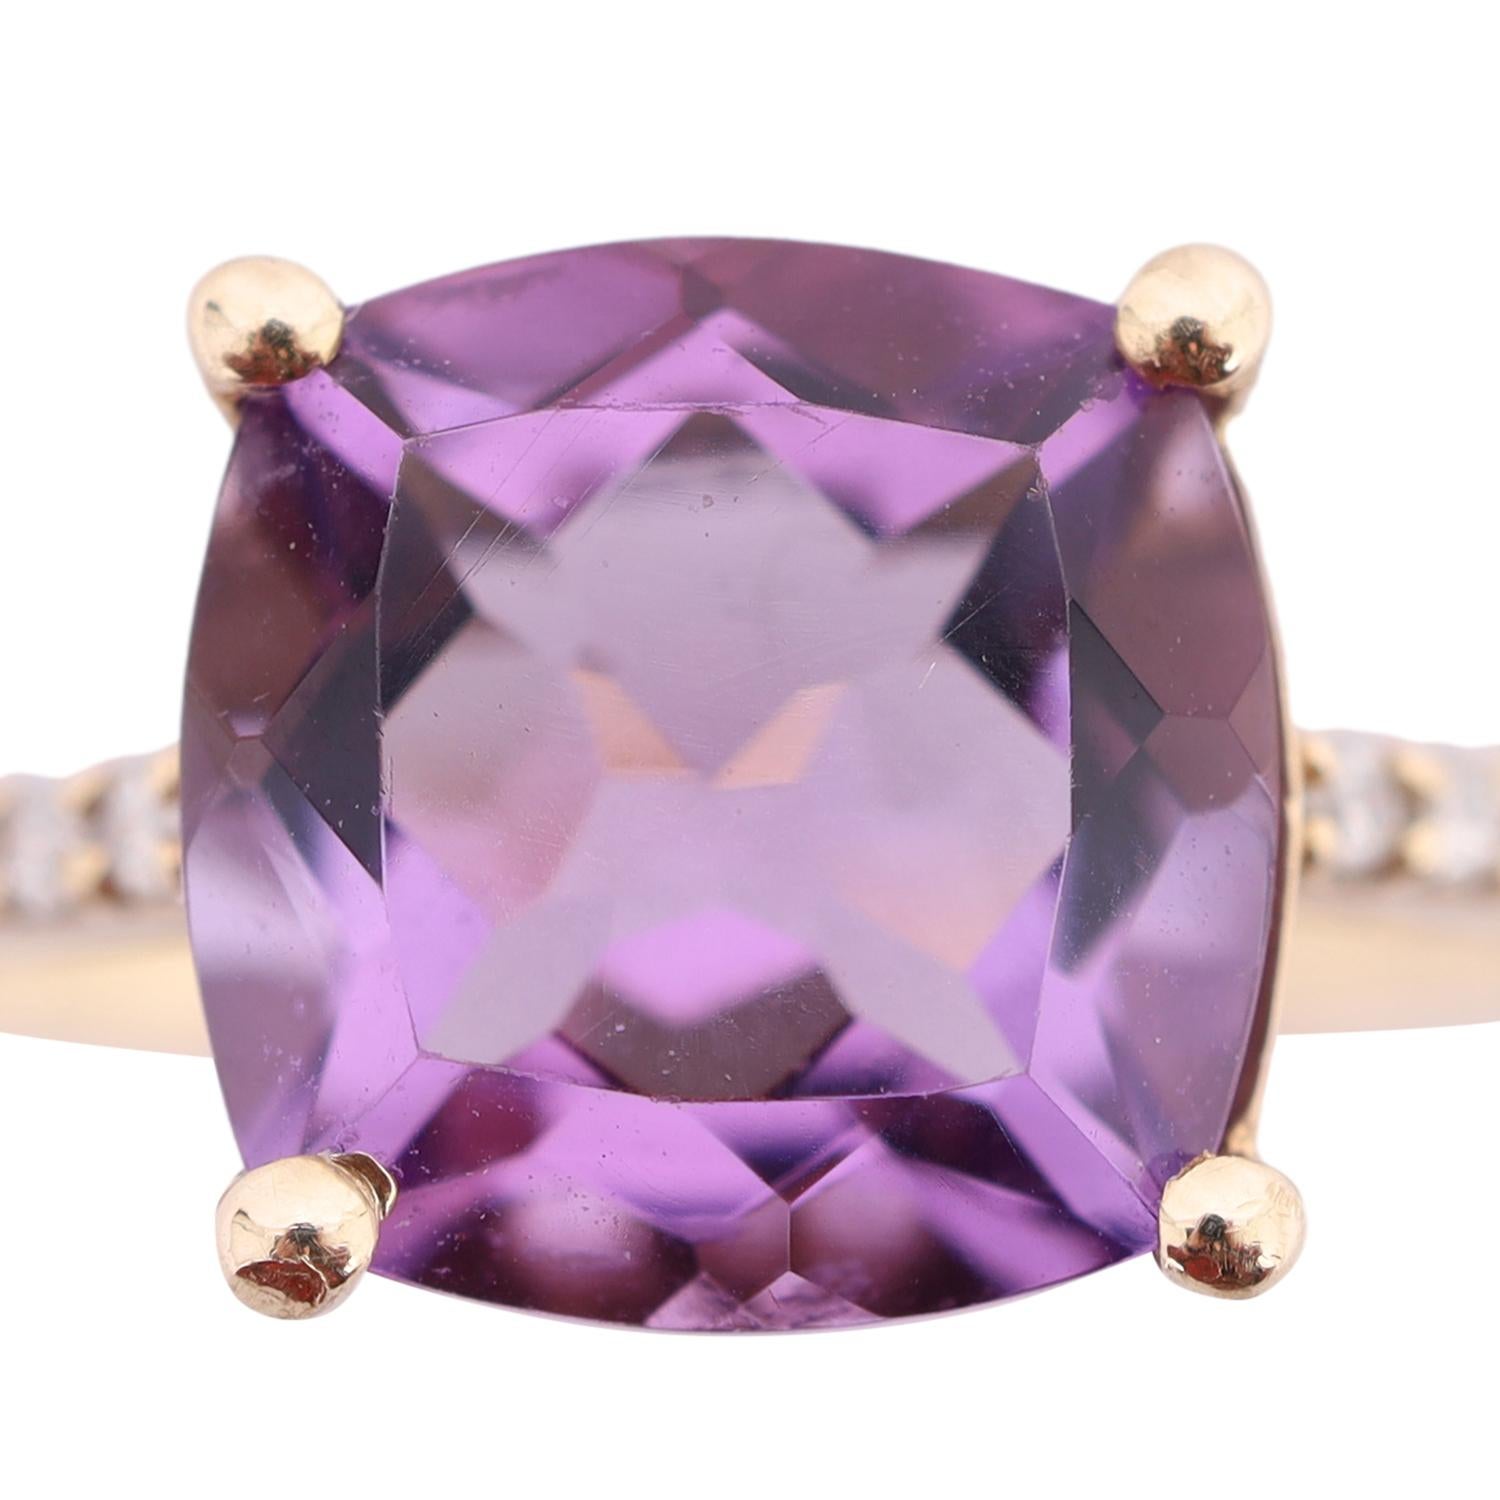 Curated by The Lady Bag Ladies 

Being offered for sale is a 10K Yellow Gold Cushion Cut Amethyst and White Sapphire Ring.

The ring features a large cushion cut and prong set amethyst as the main stone. It measures in at 8mm x 7.97mm. It is